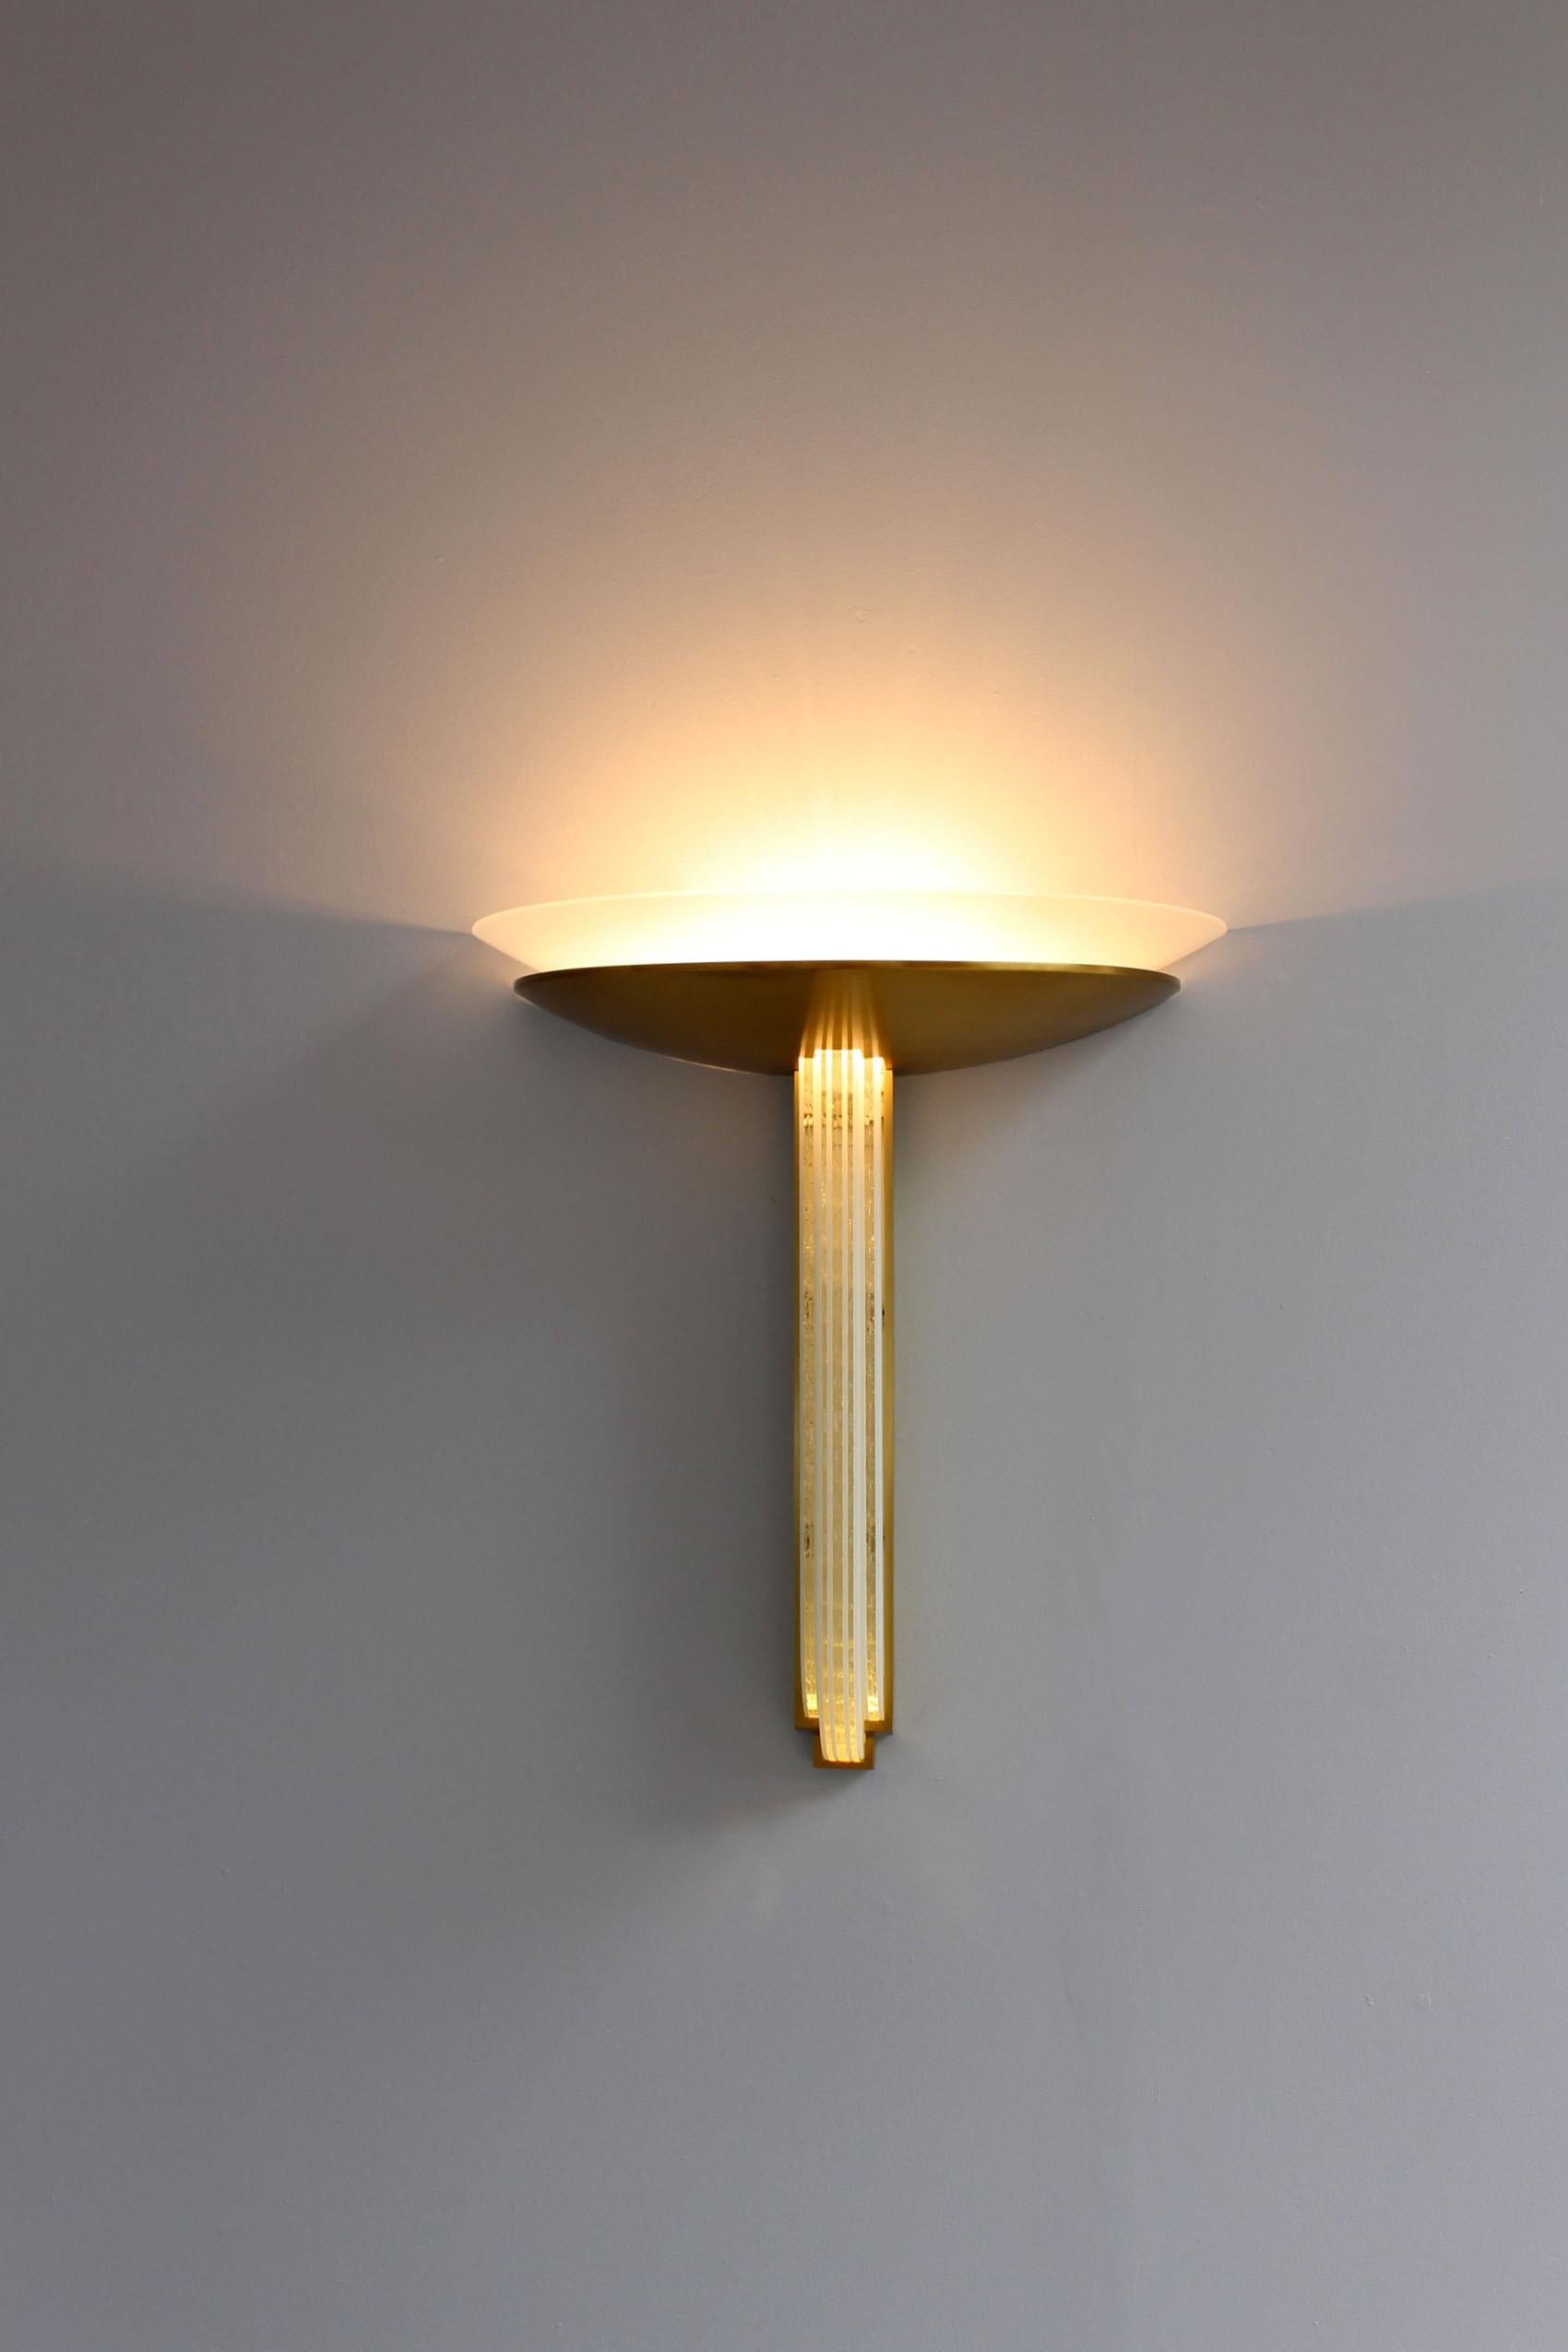 Fine French Art Deco Bronze and Glass Wall Light by Perzel, '2 Available' For Sale 1